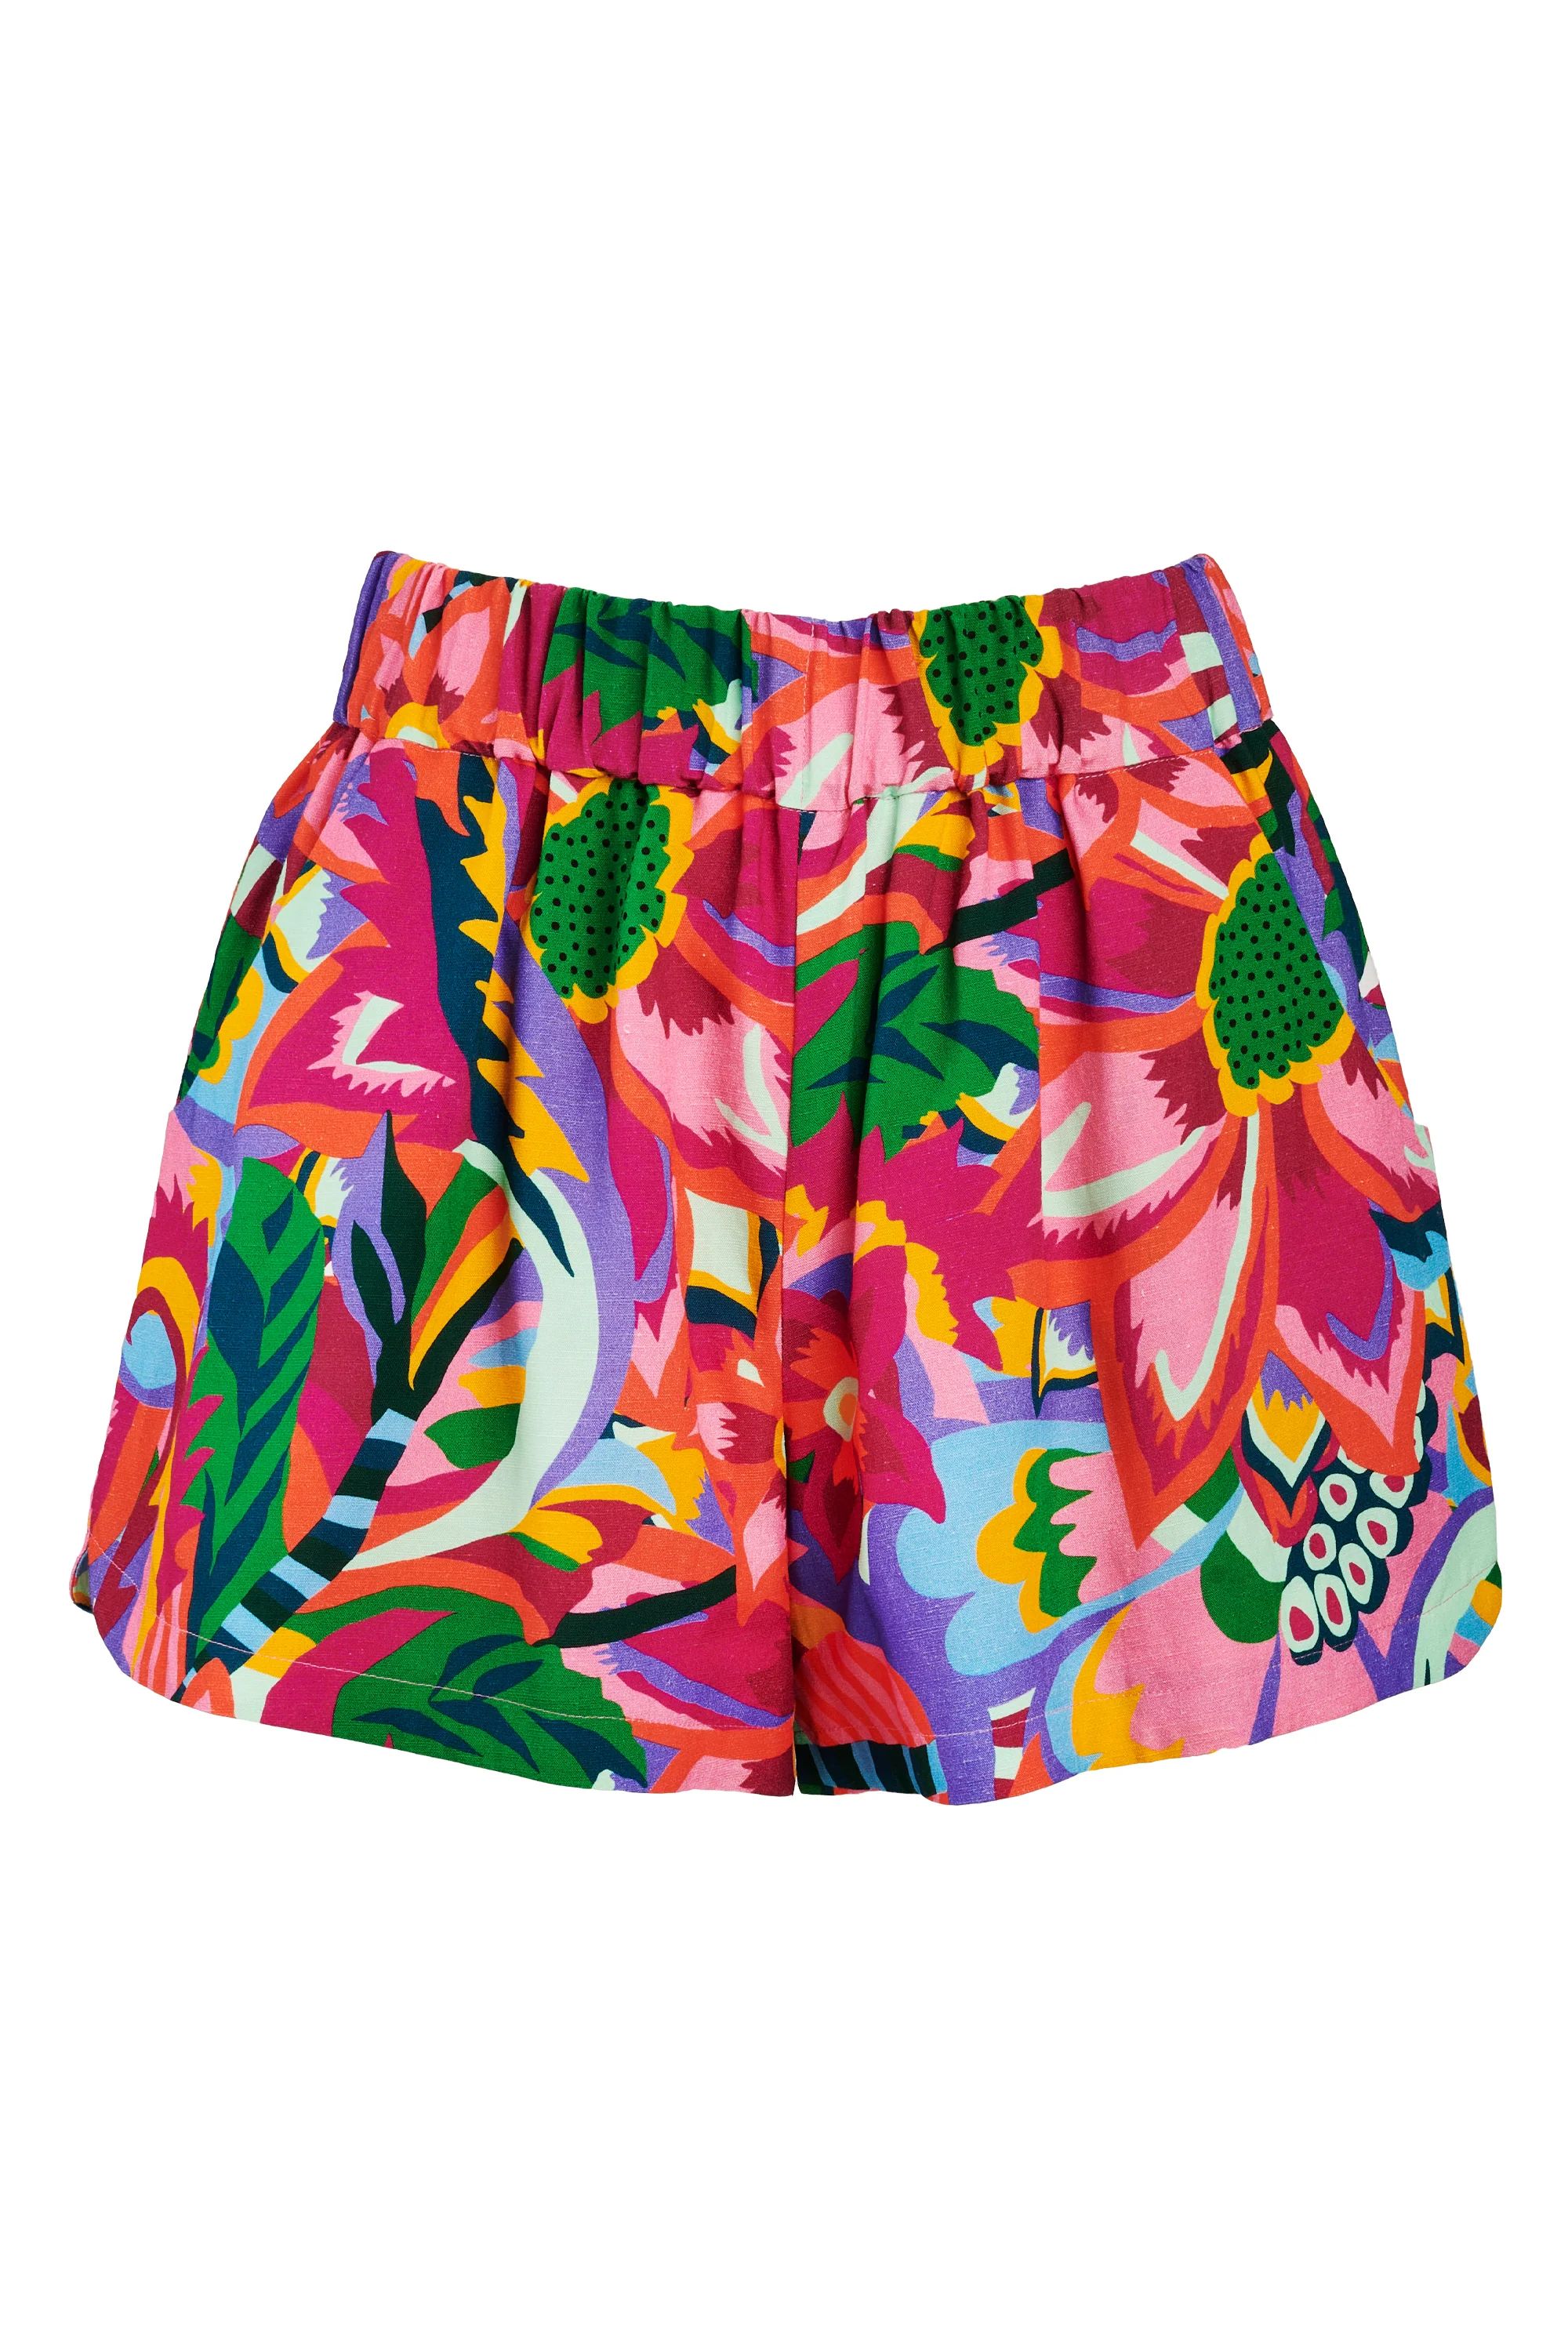 Cailan Short in Heat Waves - CROSBY by Mollie Burch | CROSBY by Mollie Burch